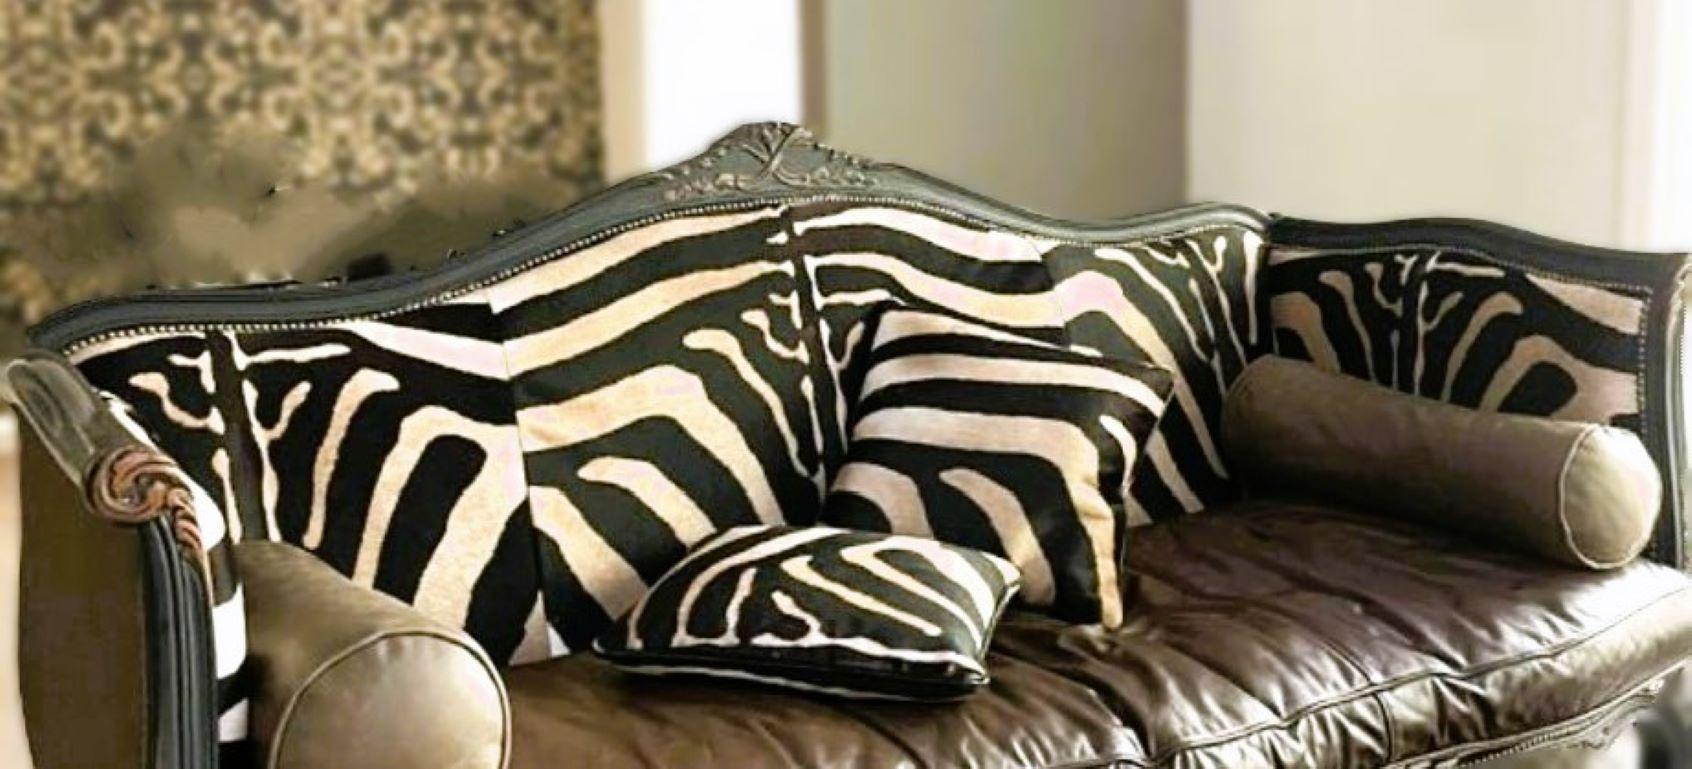 American Old Hickory Tannery Sofas/Zebra Print Cowhair, Leather. Suede & Nailhead Trim